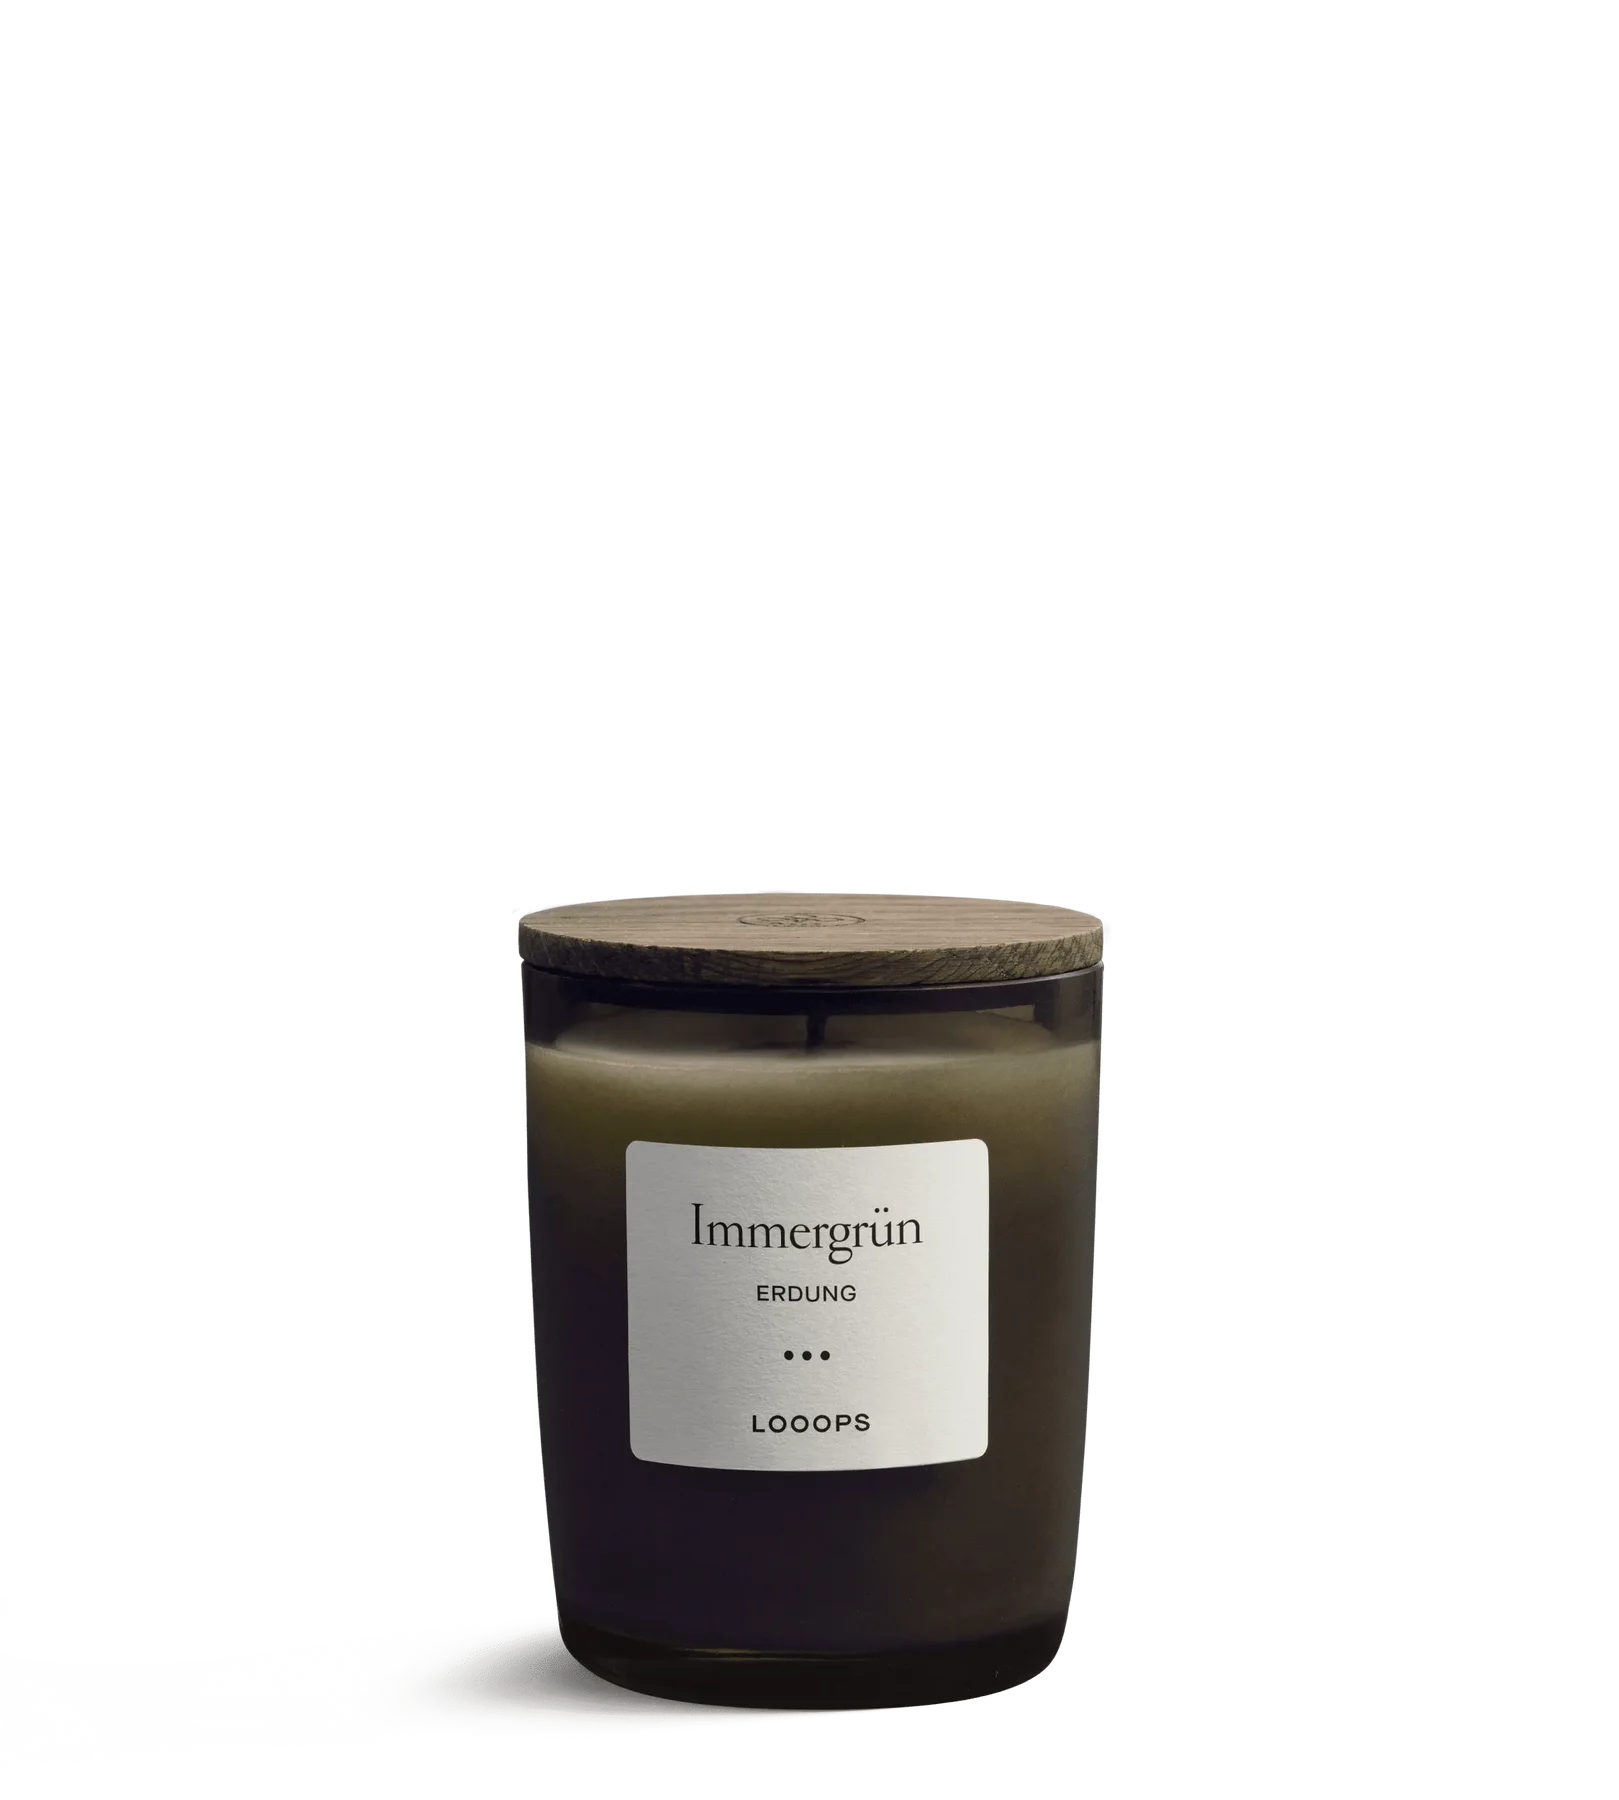 Immergrün scented candle 75 g